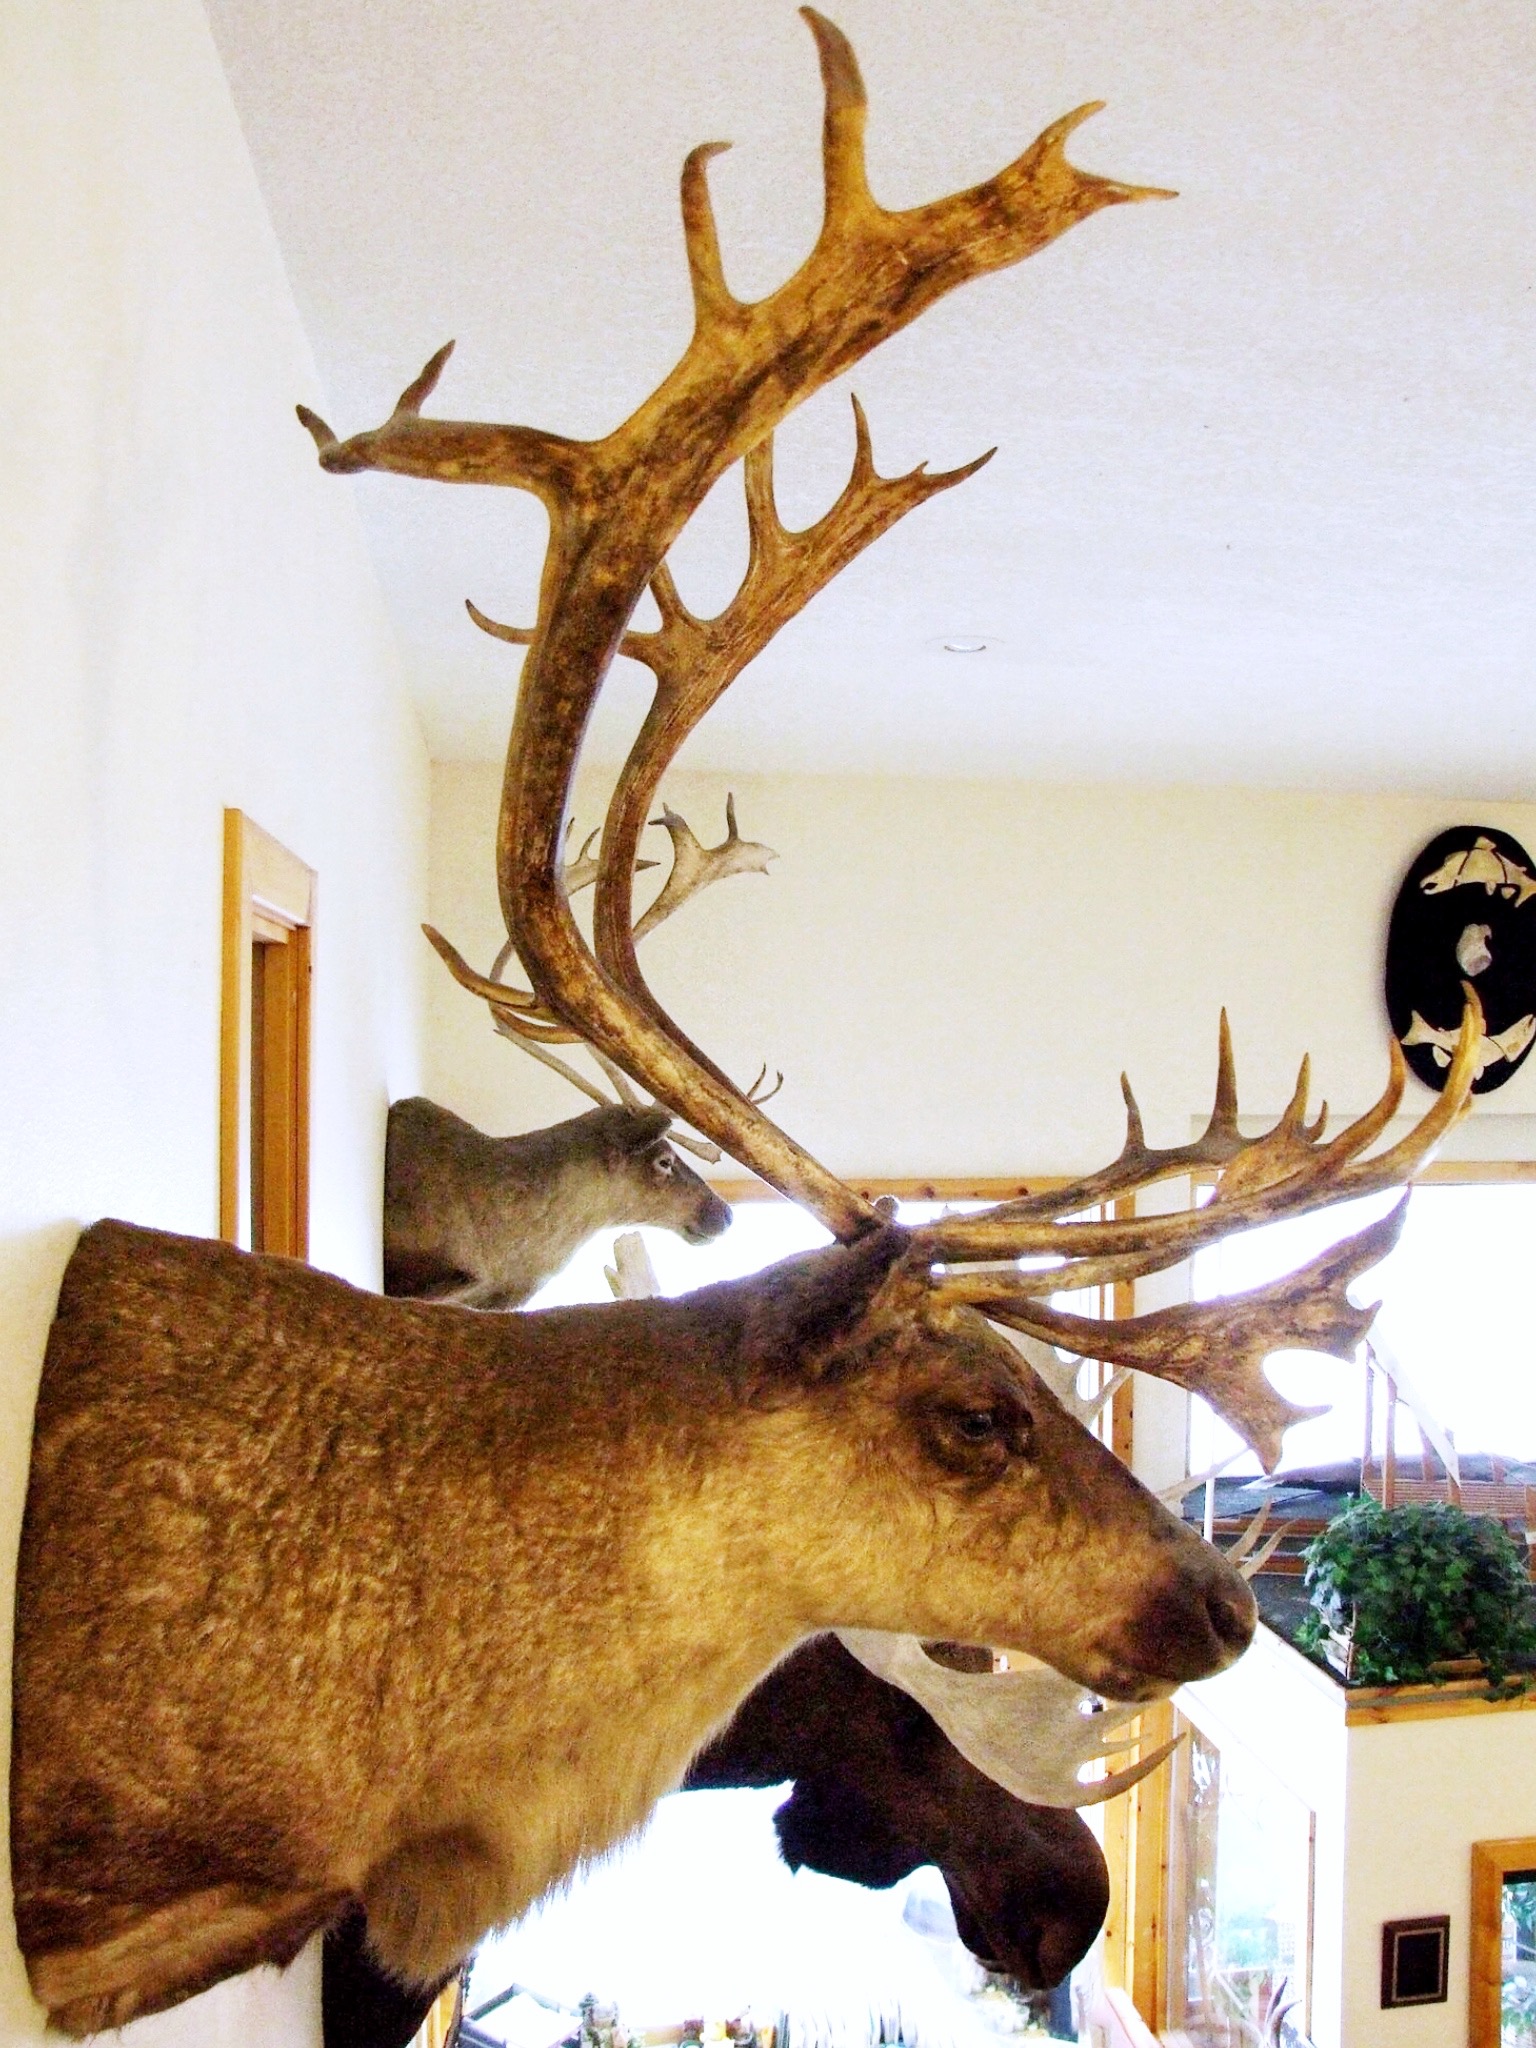 Taxidermy of caribou heads on display at the front desk of Caribou Lodge in Glennallen, Alaska